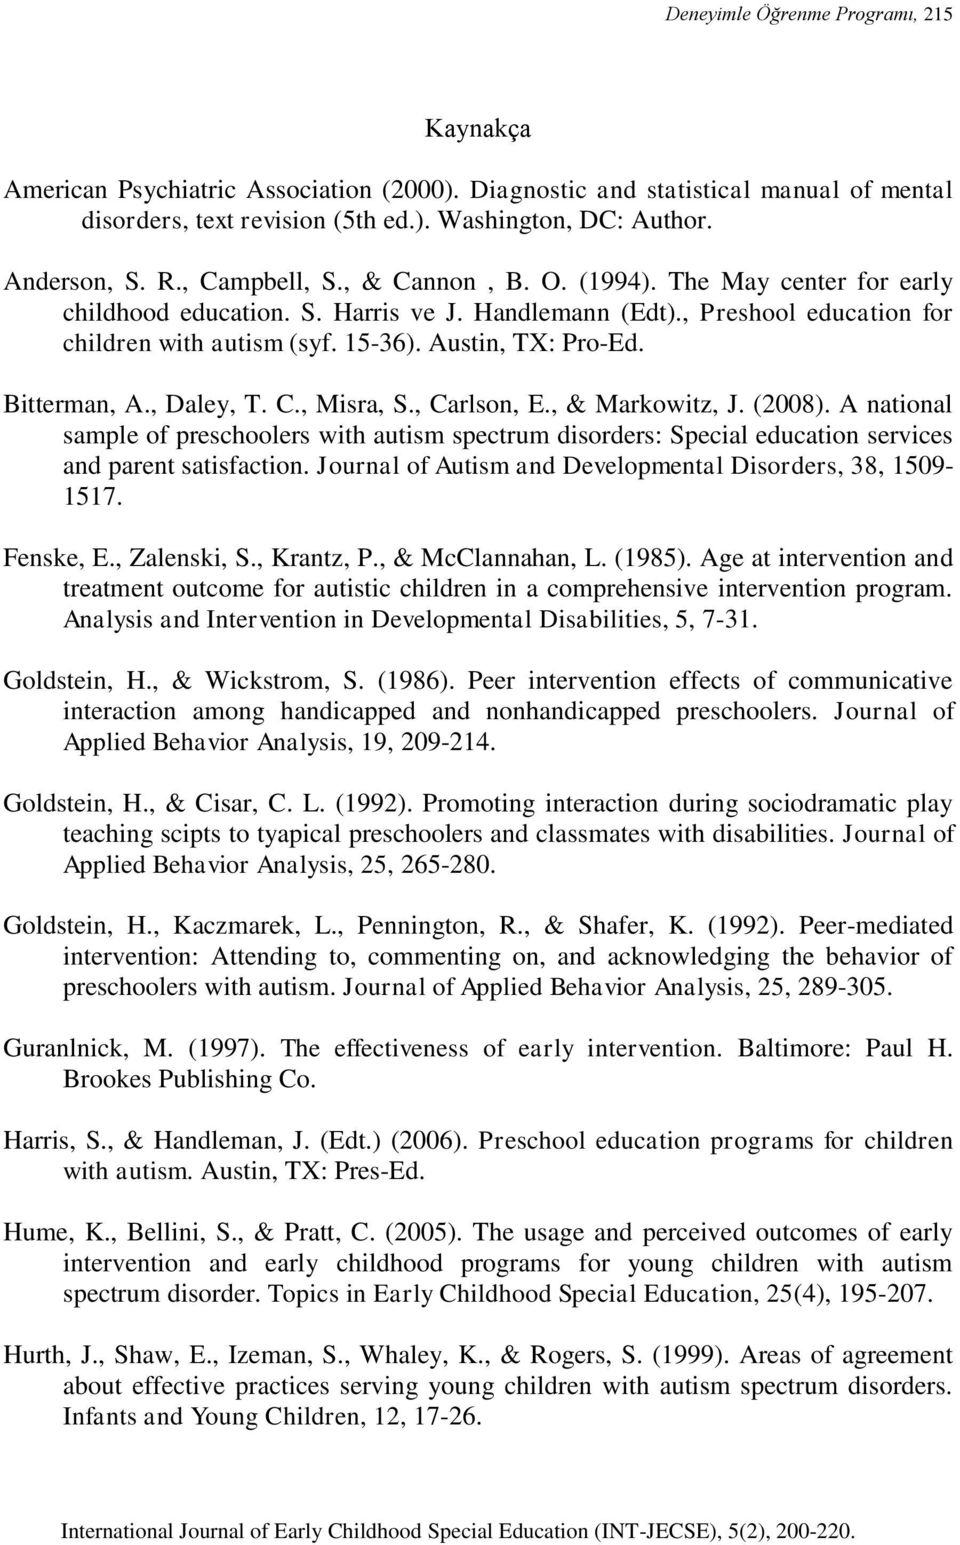 Bitterman, A., Daley, T. C., Misra, S., Carlson, E., & Markowitz, J. (2008). A national sample of preschoolers with autism spectrum disorders: Special education services and parent satisfaction.